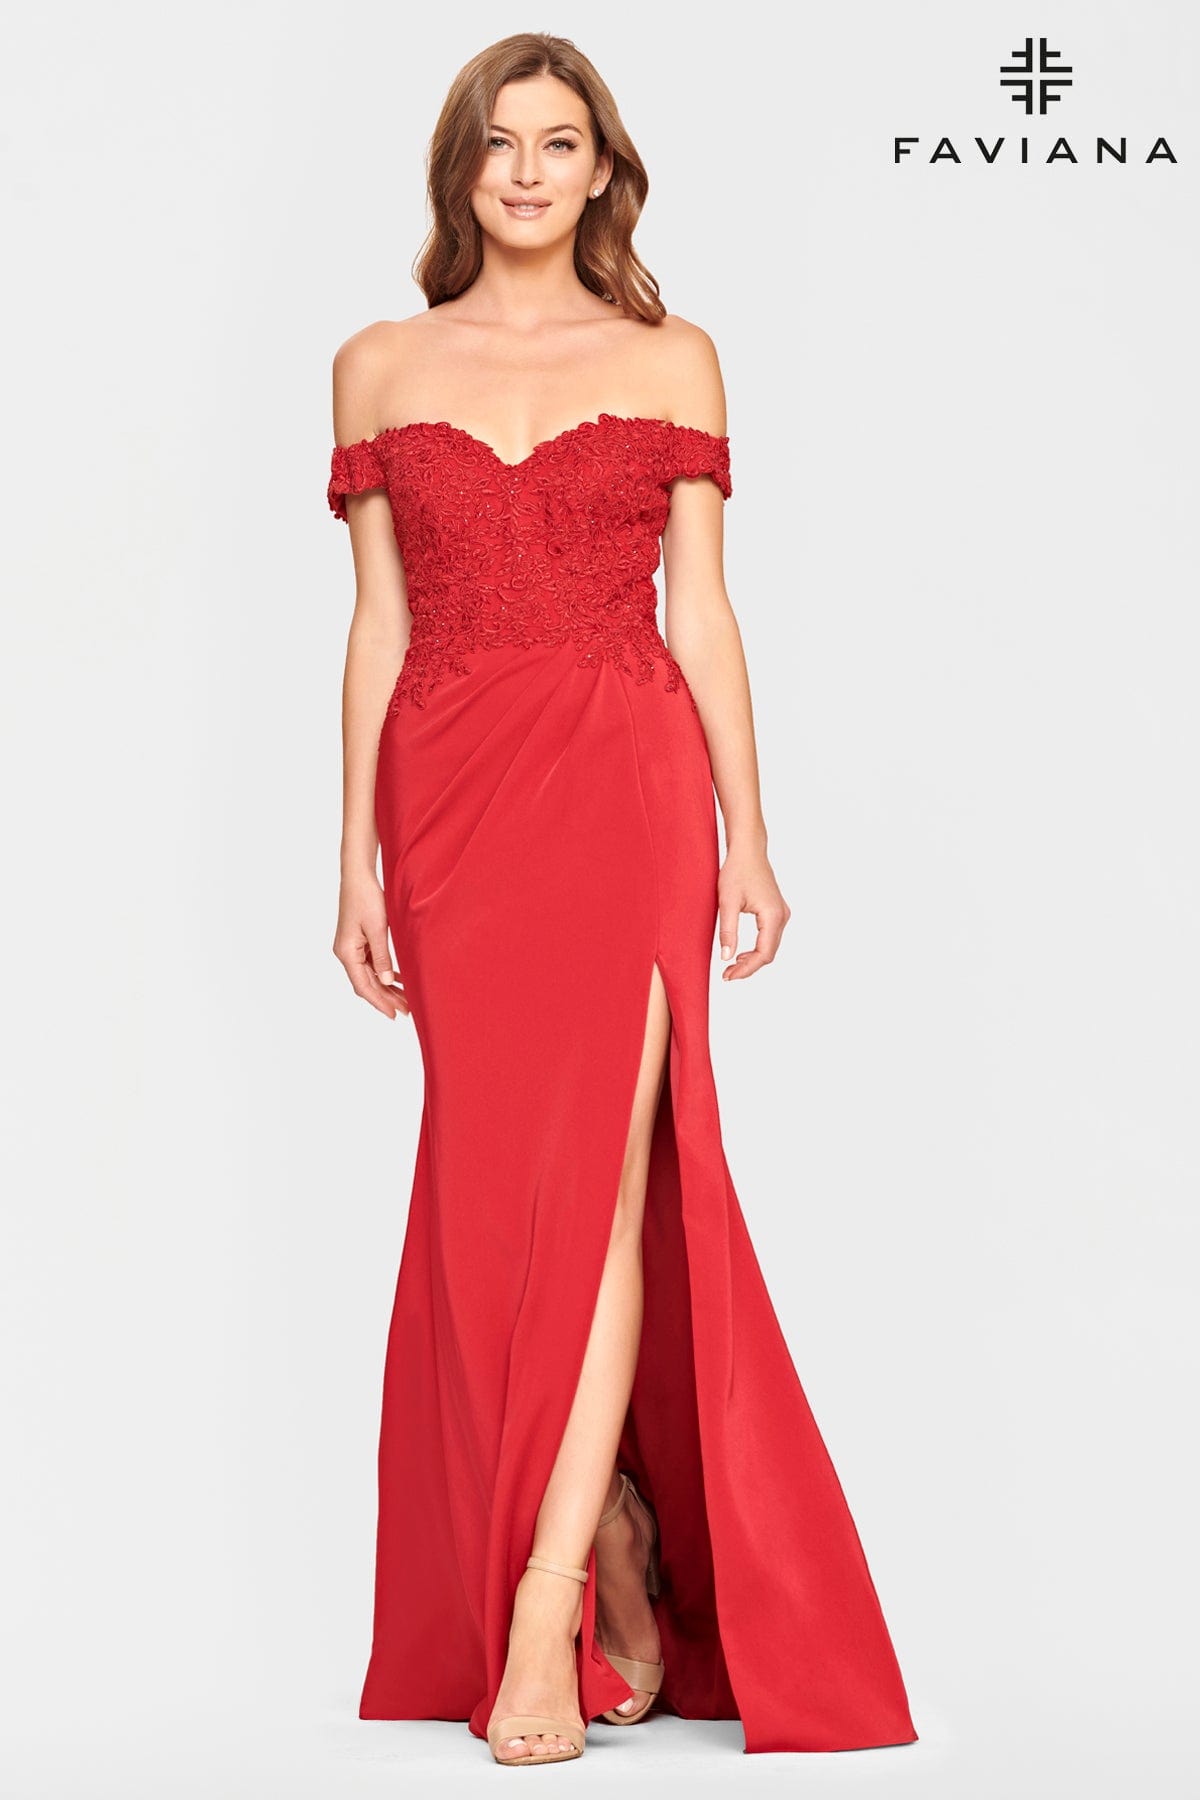 Long Strapless Dress With Lace Applique Bodice And Pleated Skirt In Extended Sizes